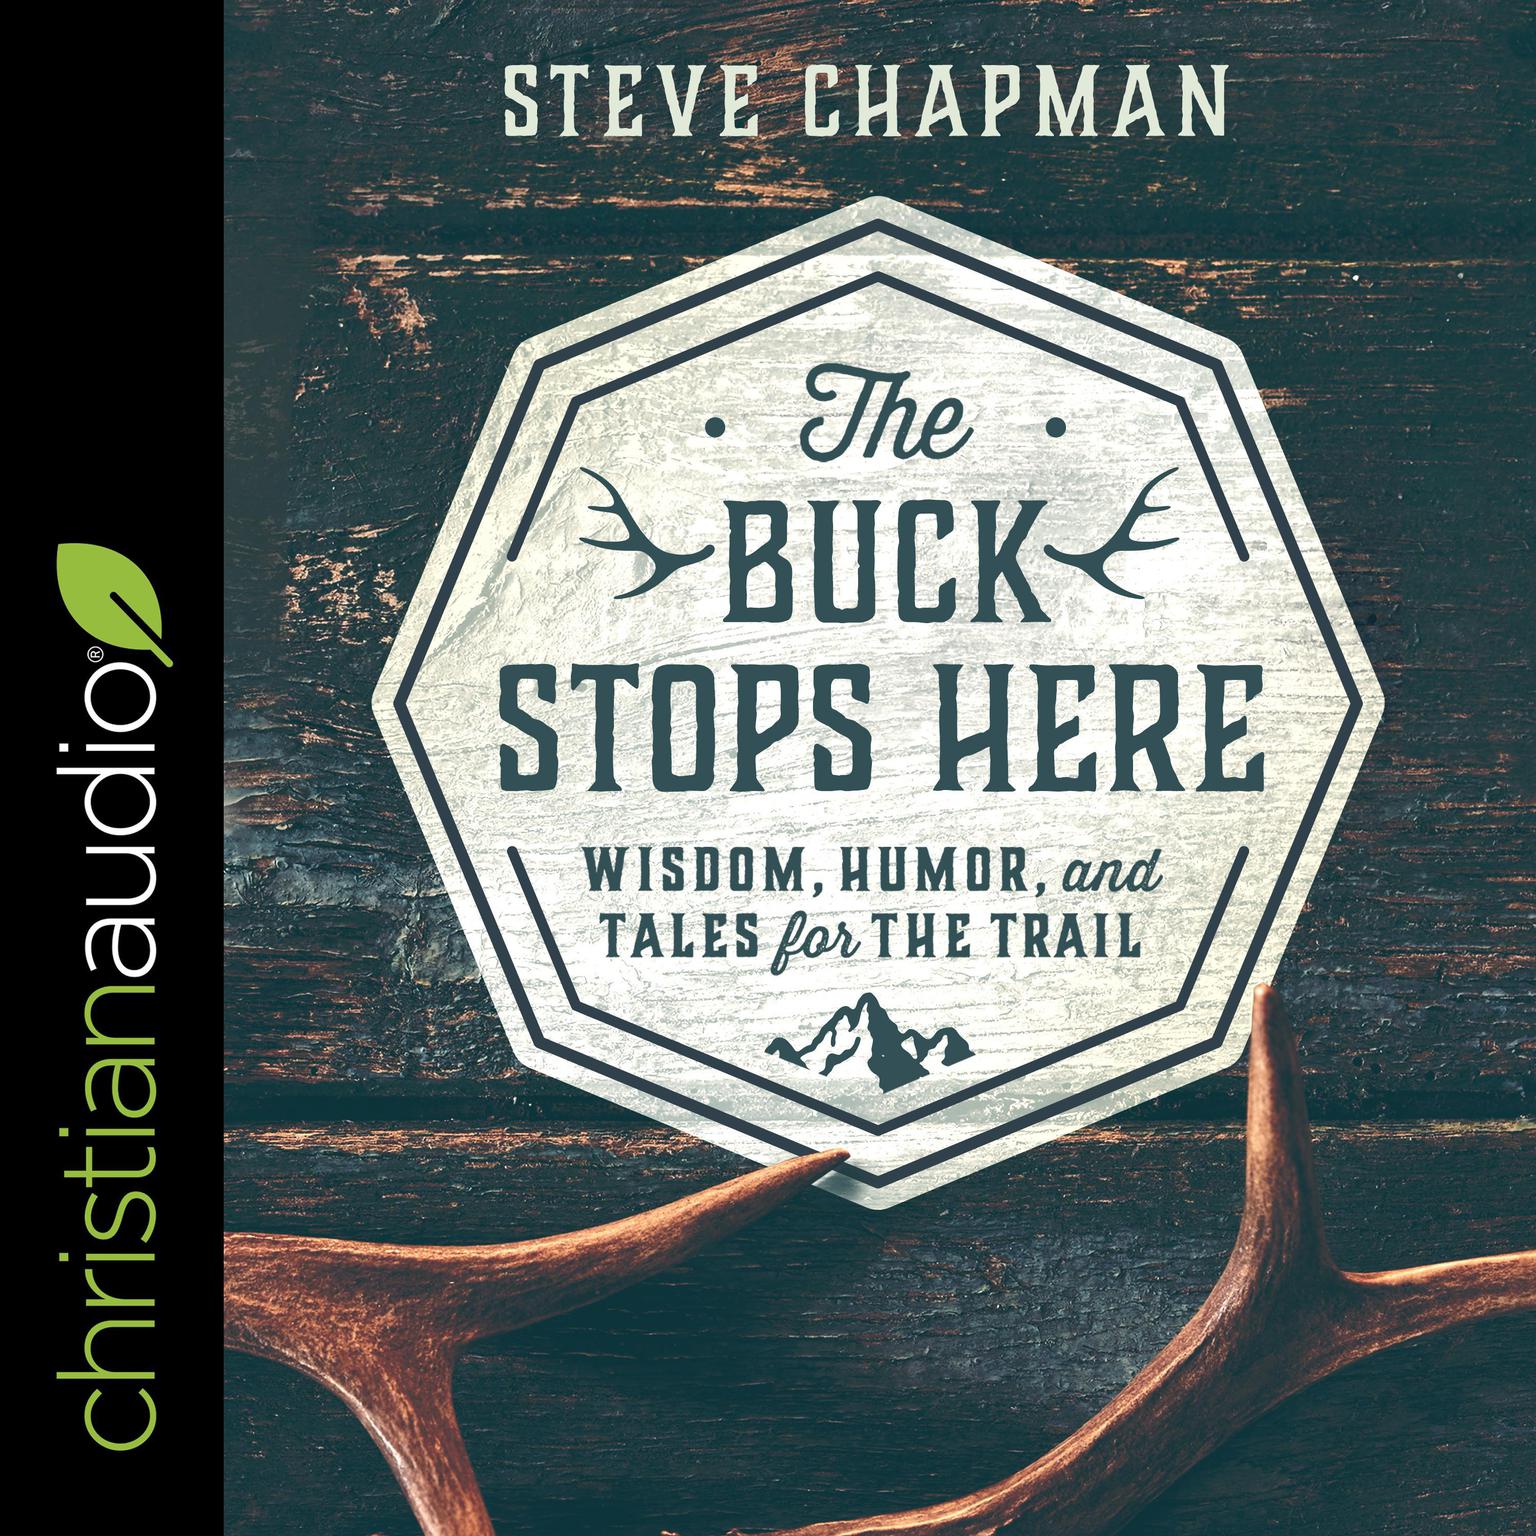 The Buck Stops Here: Wisdom, Humor, and Tales for the Trail Audiobook, by Steve Chapman